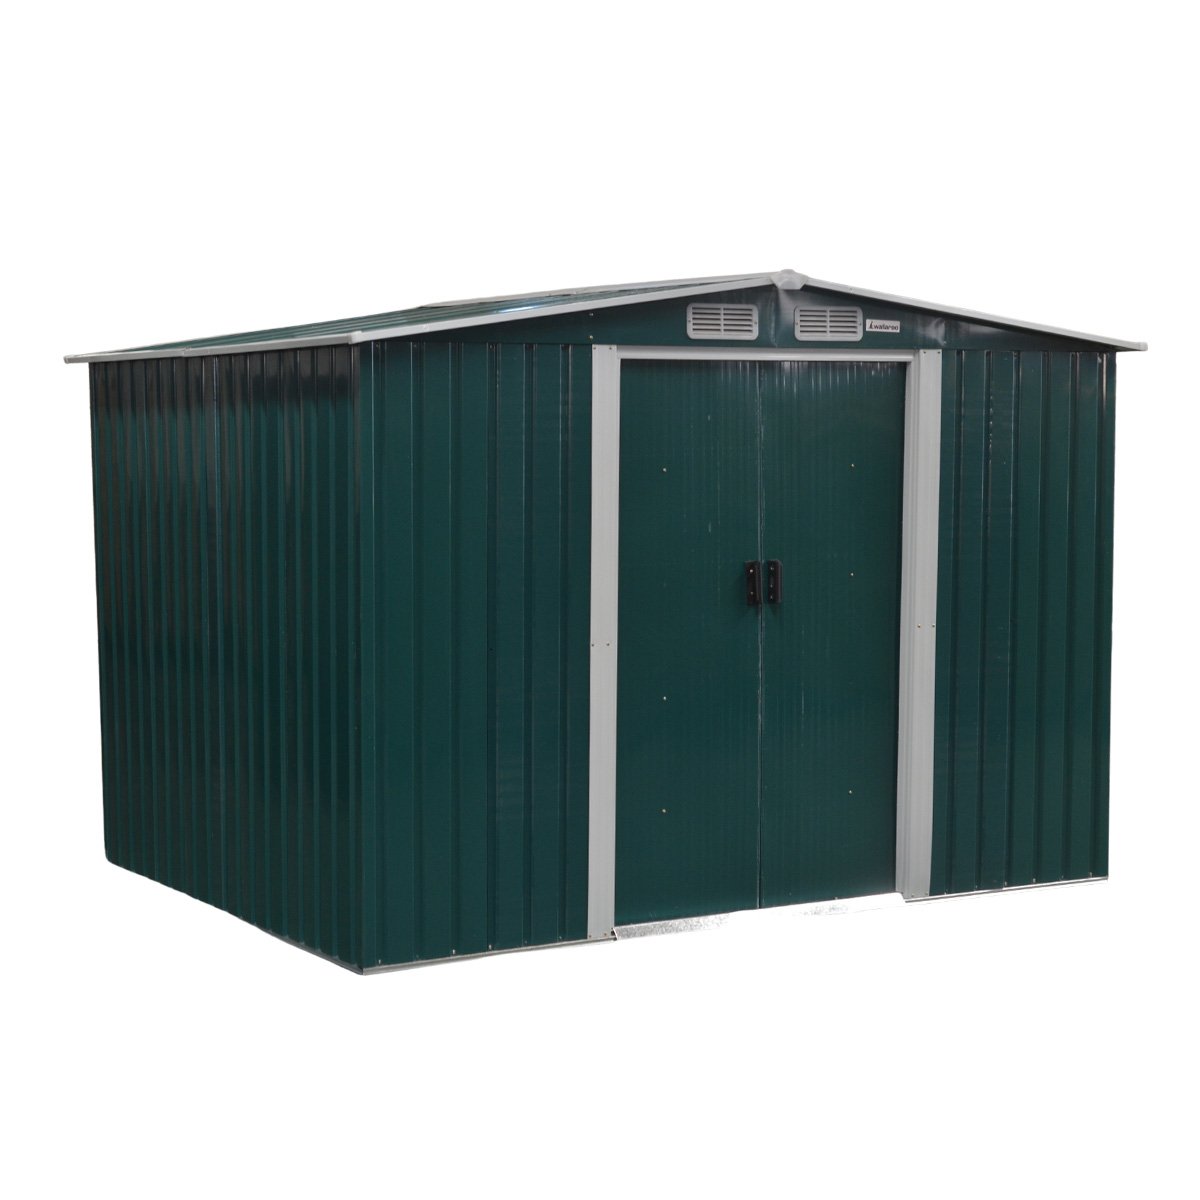 Garden Shed Spire Roof 6ft x 8ft Outdoor Storage Shelter - Green 1